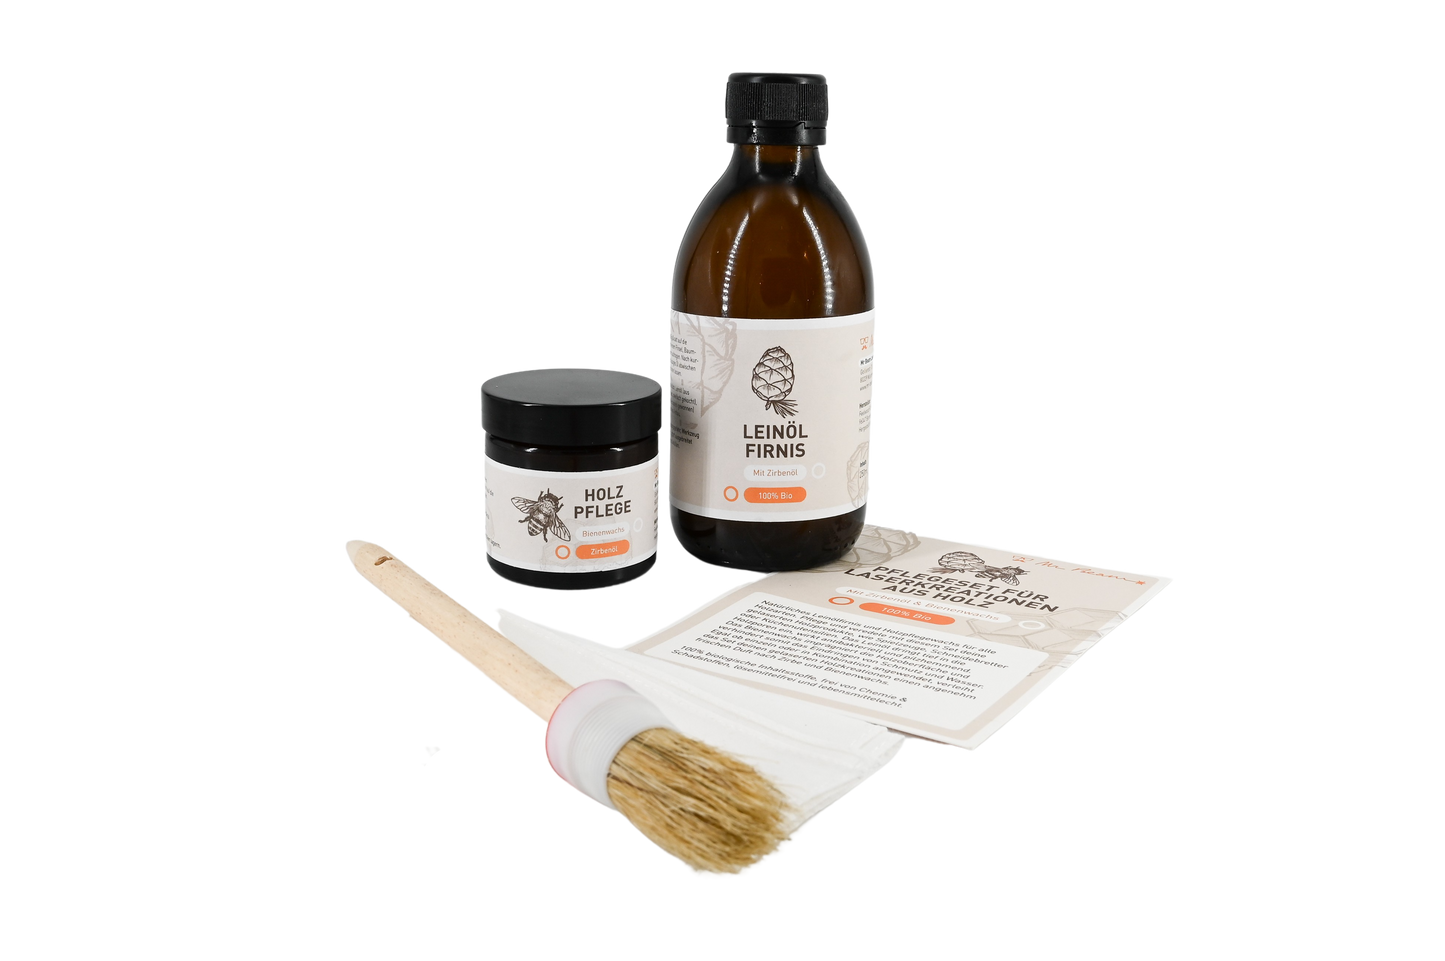 Mr Beam wood care set with stone pine oil and beeswax